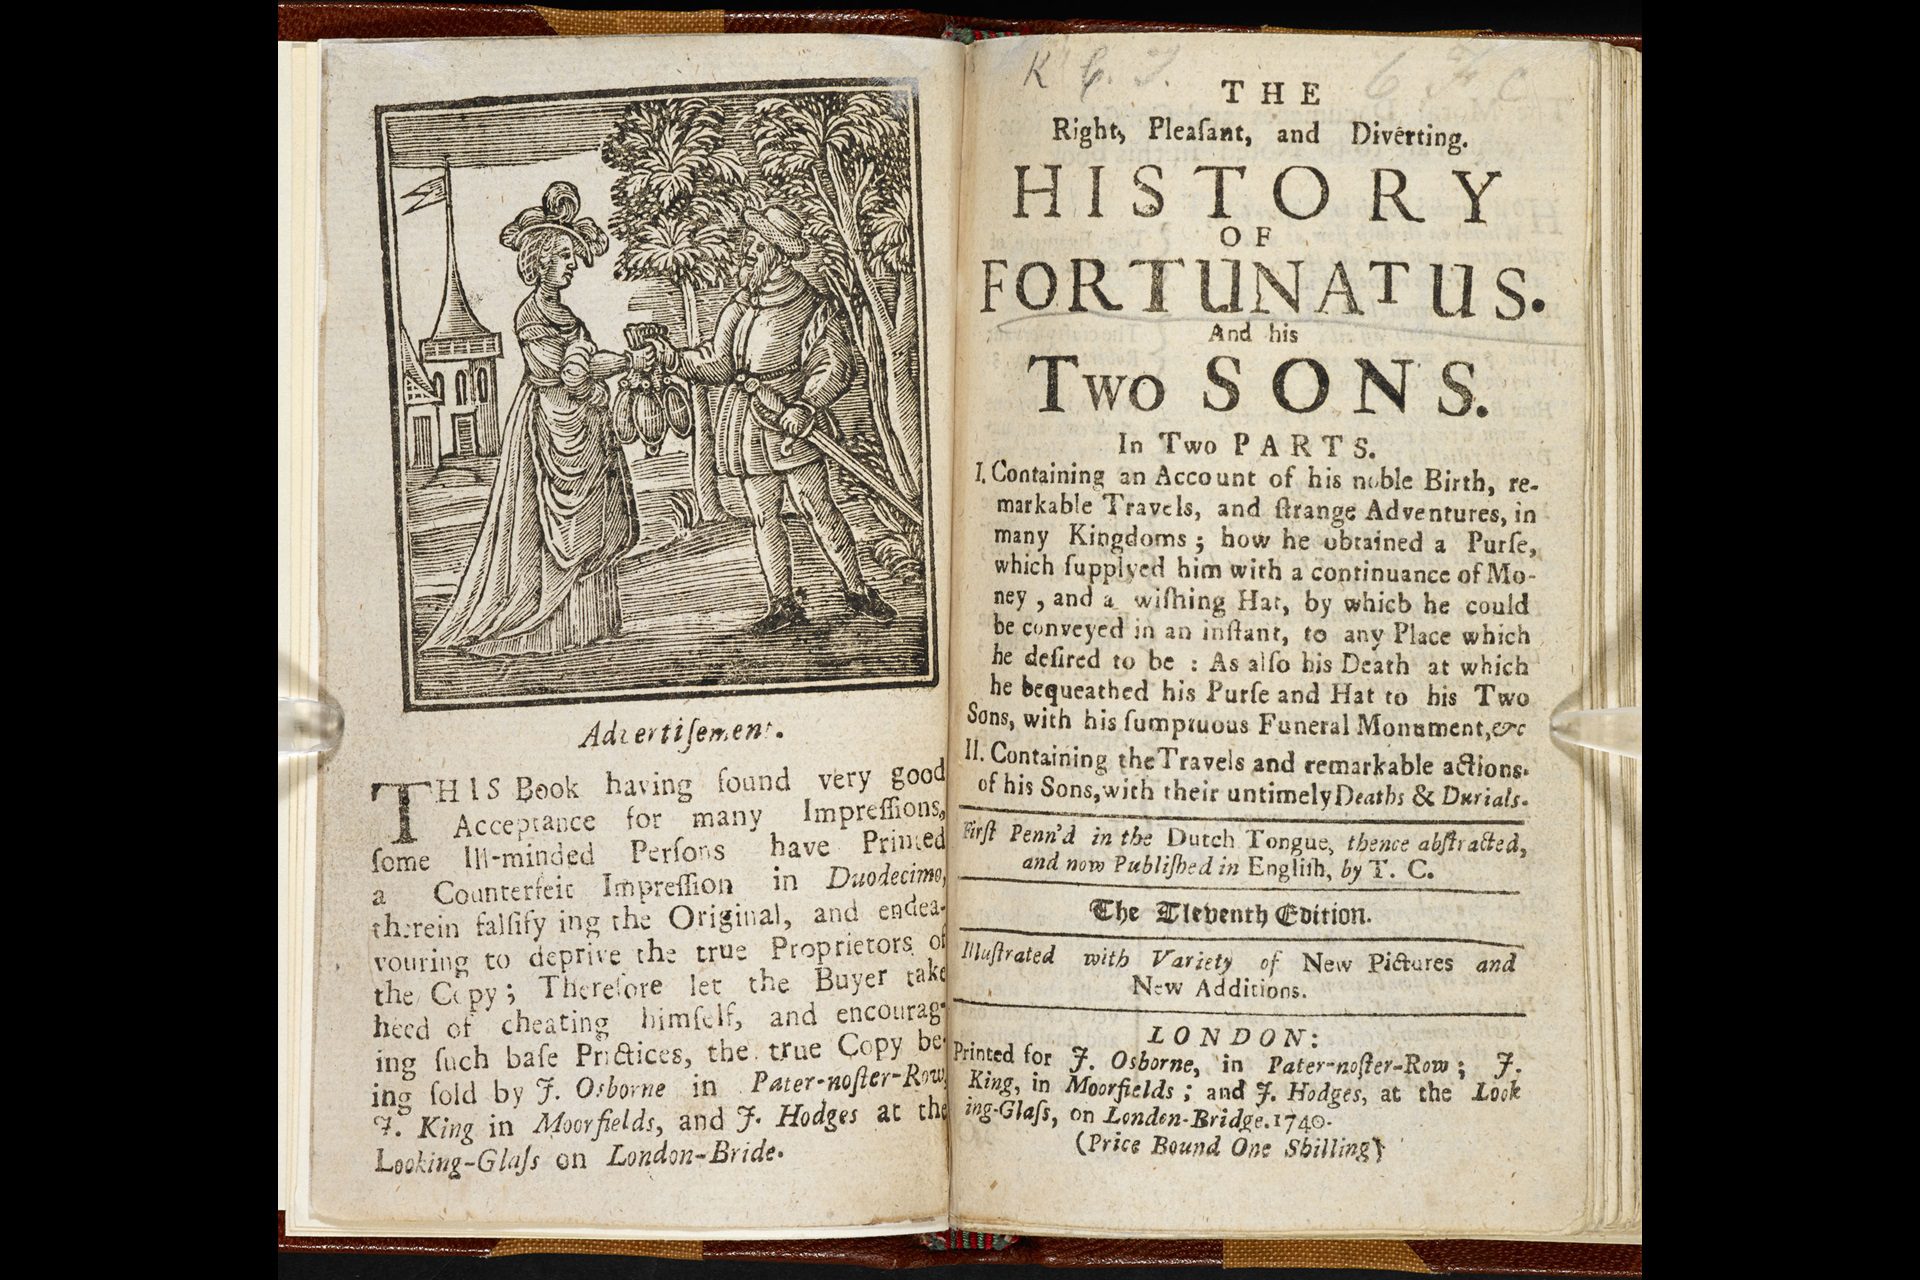 The History of Fortunatus [page: frontispiece and title page]